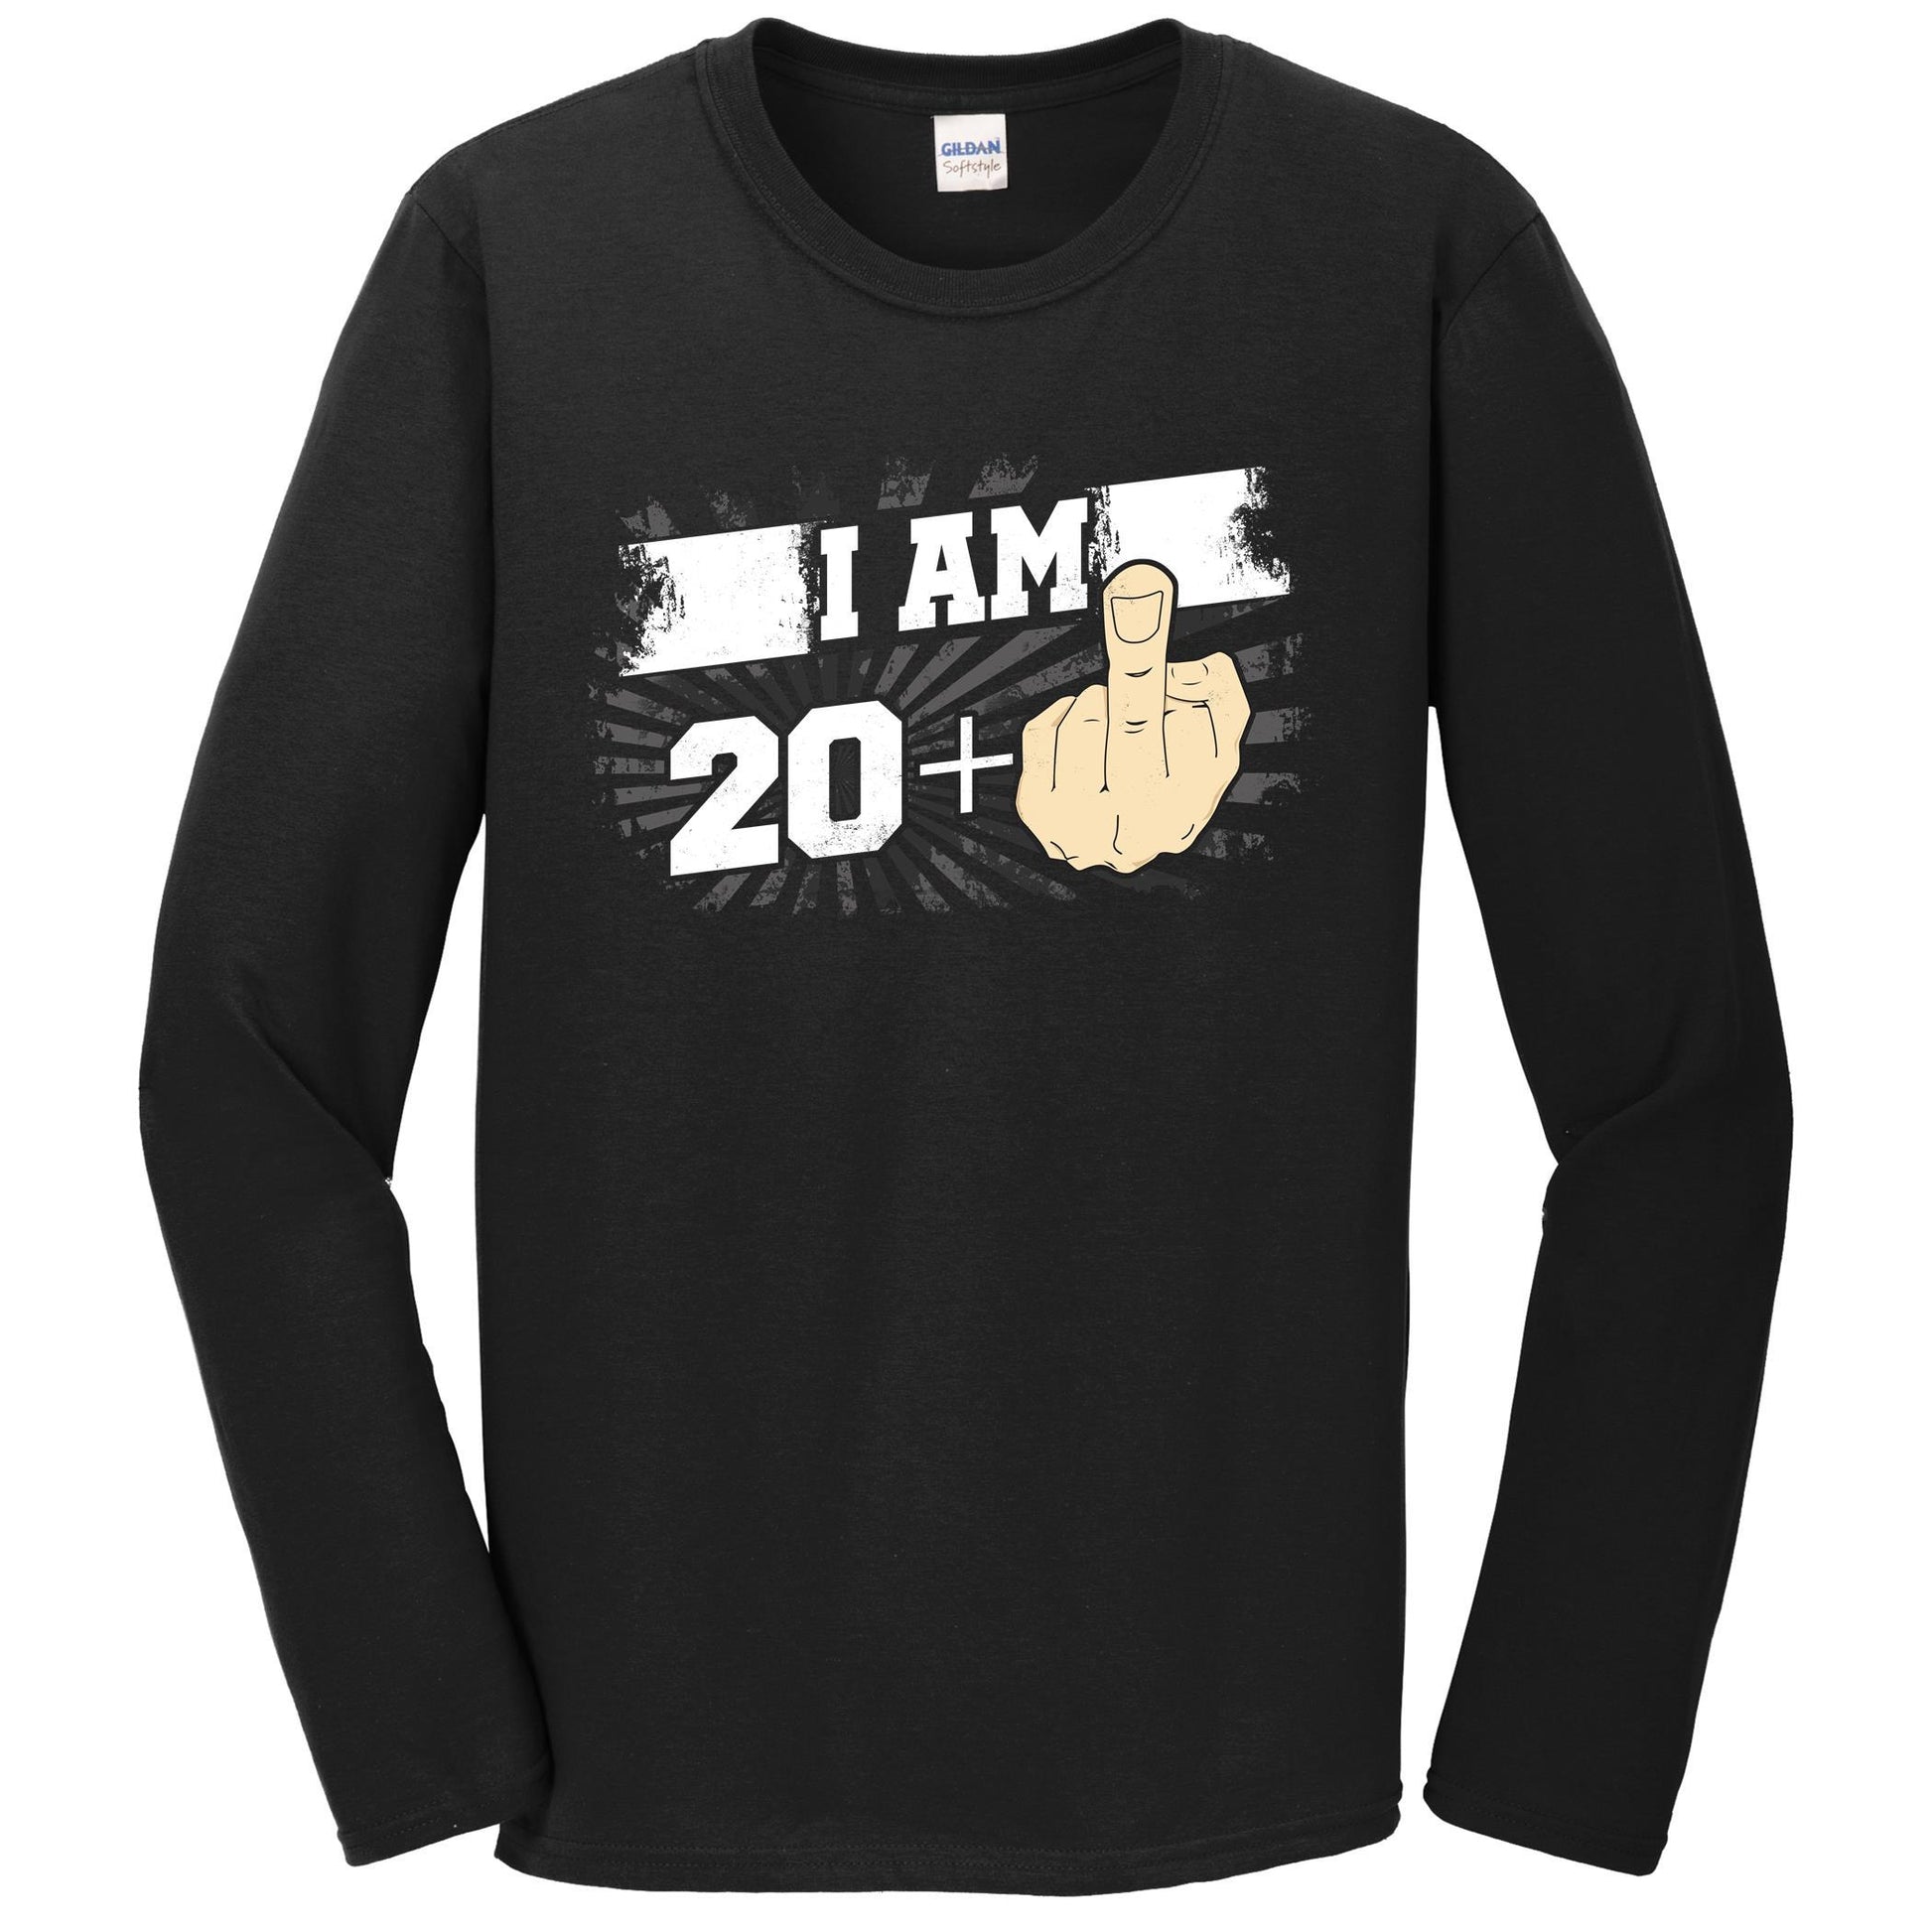 21st Birthday Shirt For Men - I Am 20 Plus Middle Finger 21 Years Old Long Sleeve T-Shirt